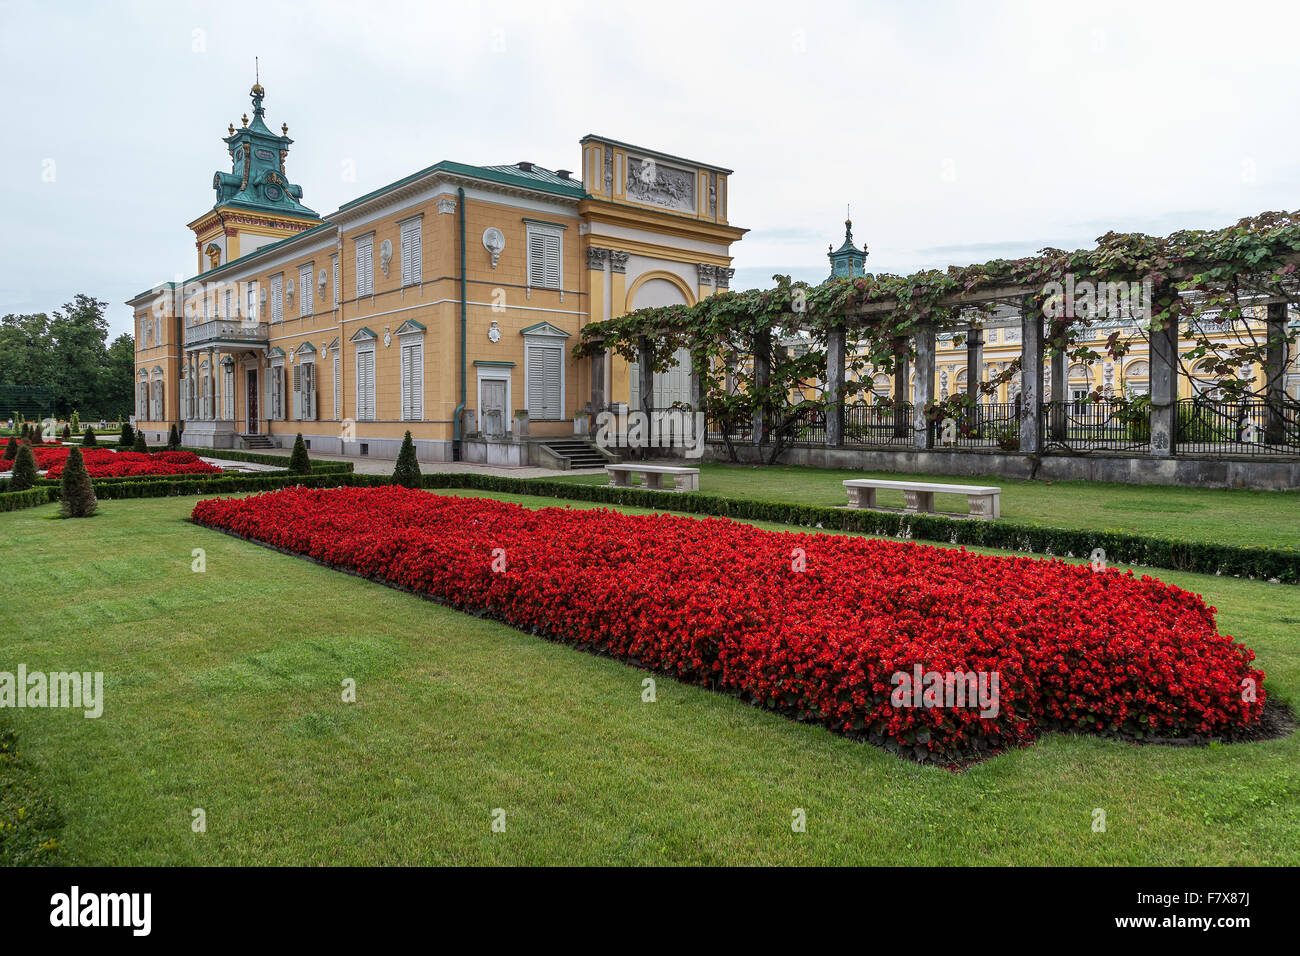 Royel Palace in Wilanow is one of Poland's most significant cultural monuments. Waszawa, Poland. Stock Photo